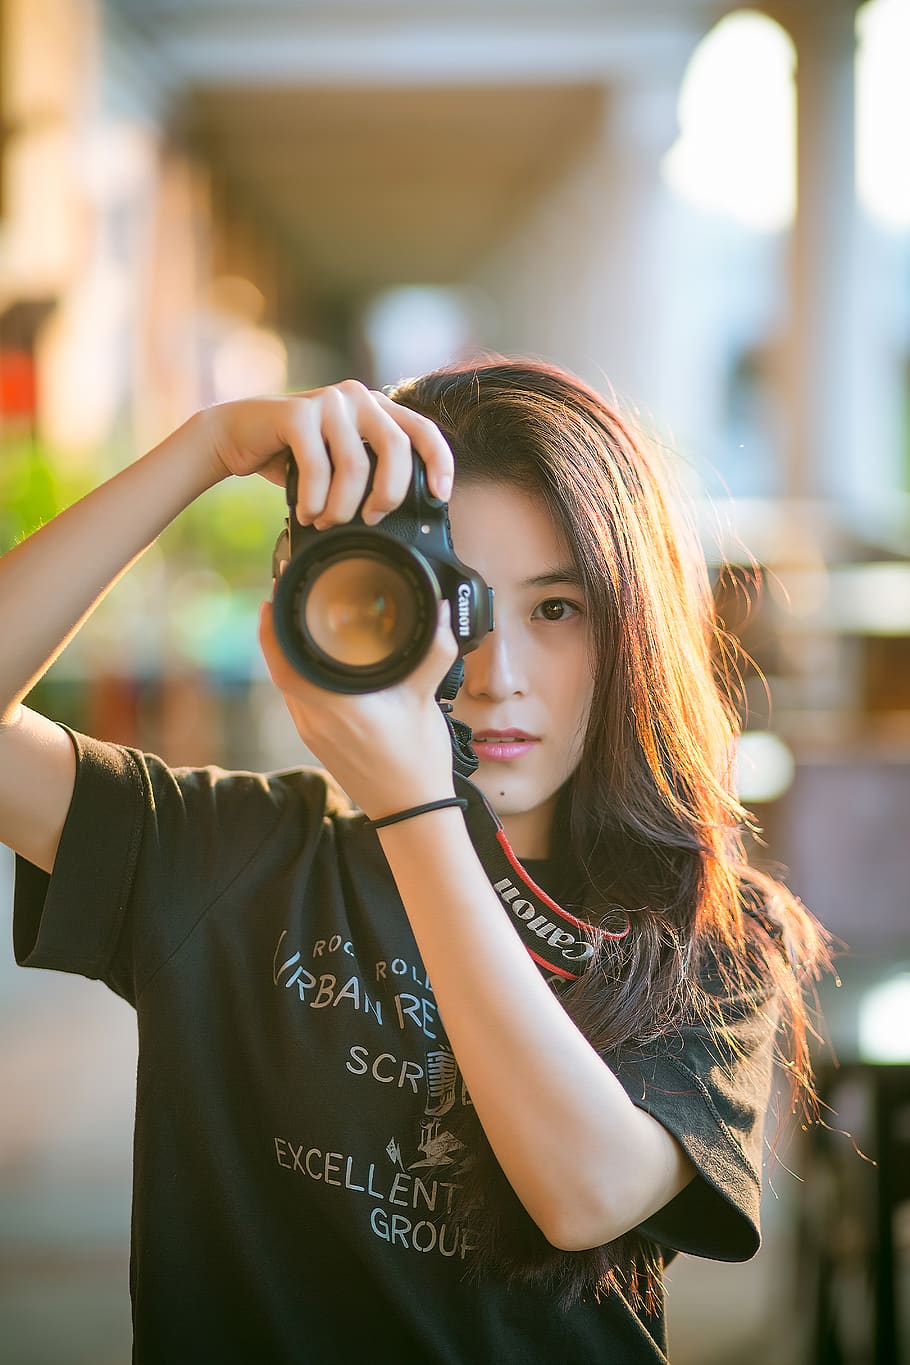 canon, lens, photography, photographer, people, woman, beauty, focus on foreground, one person, front view